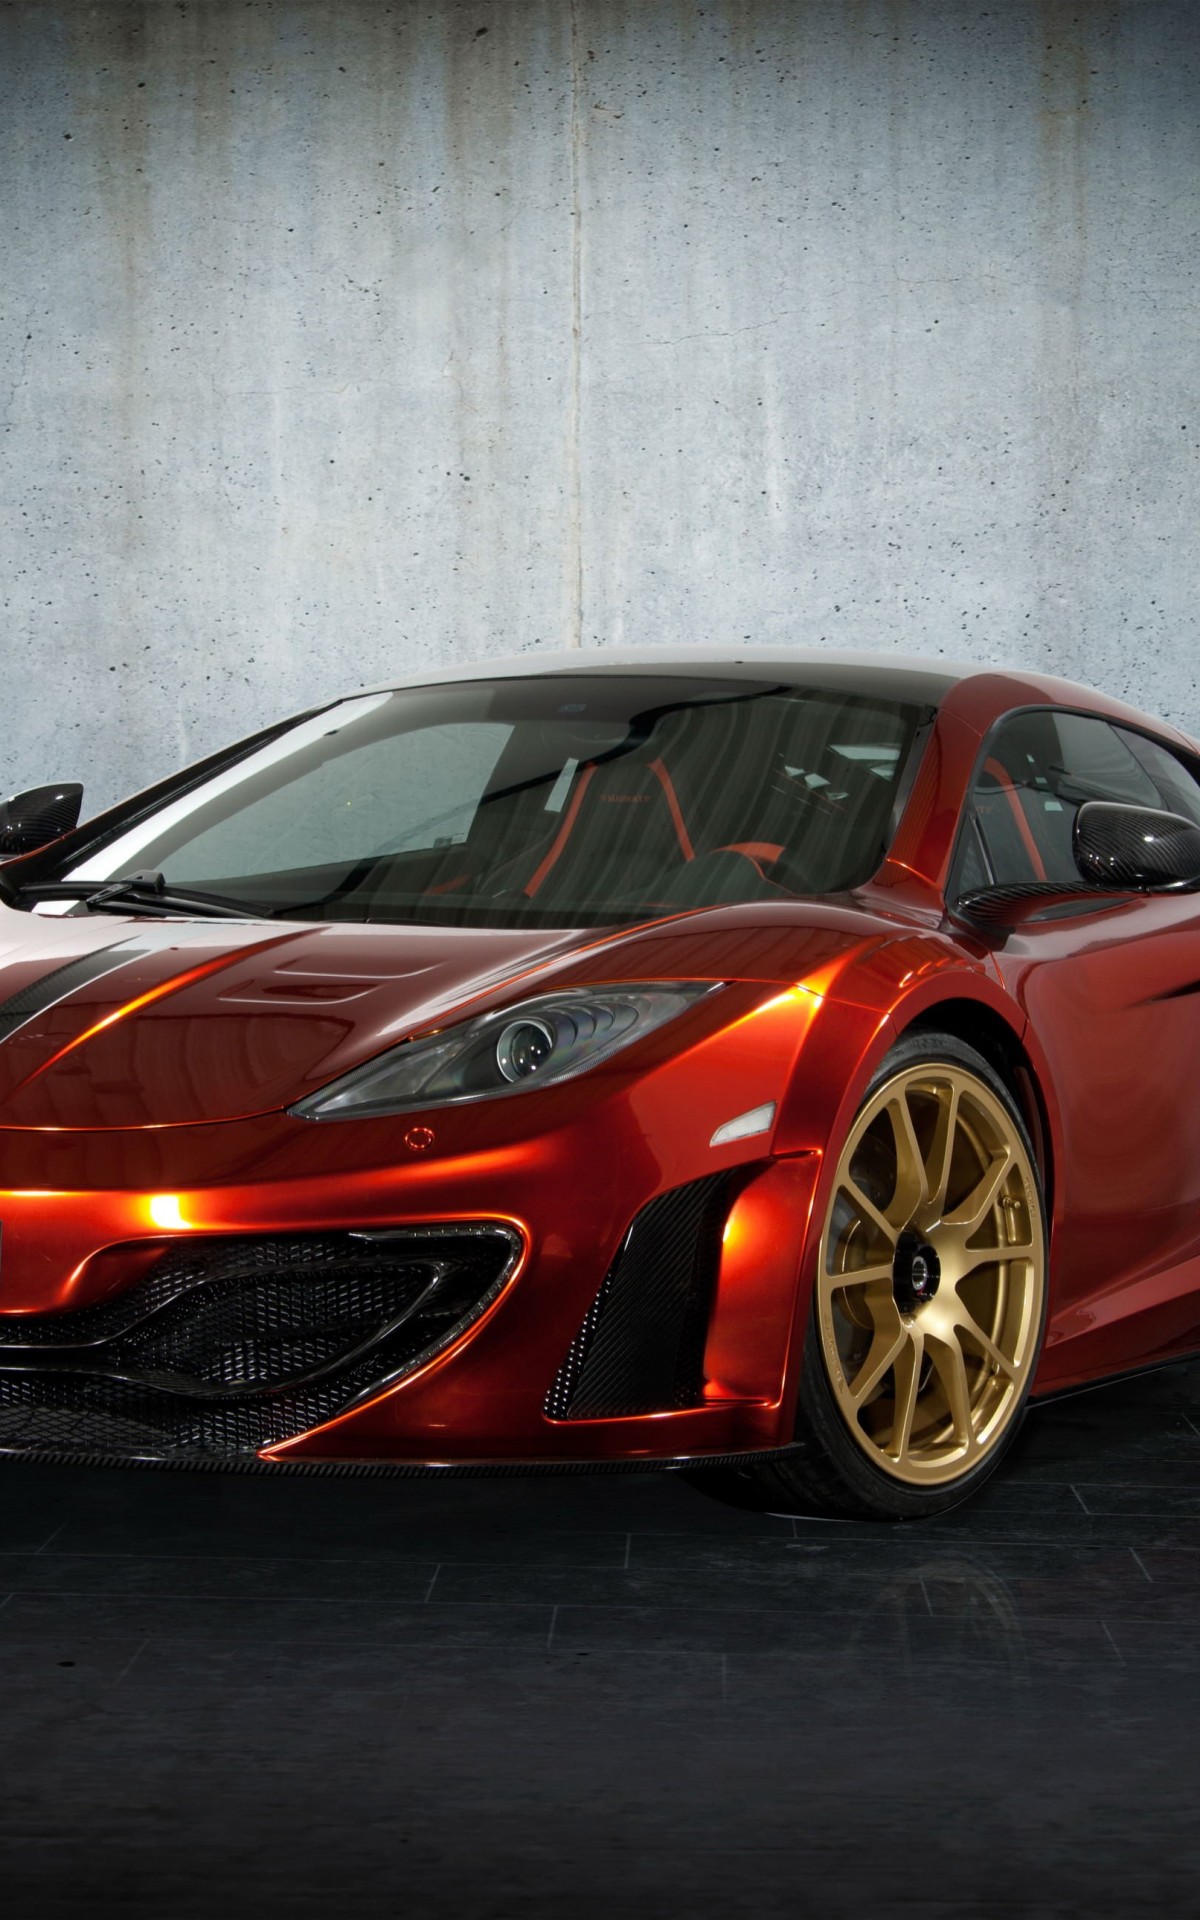 McLaren MP4-12Cf By Mansory Wallpaper for Amazon Kindle Fire HDX